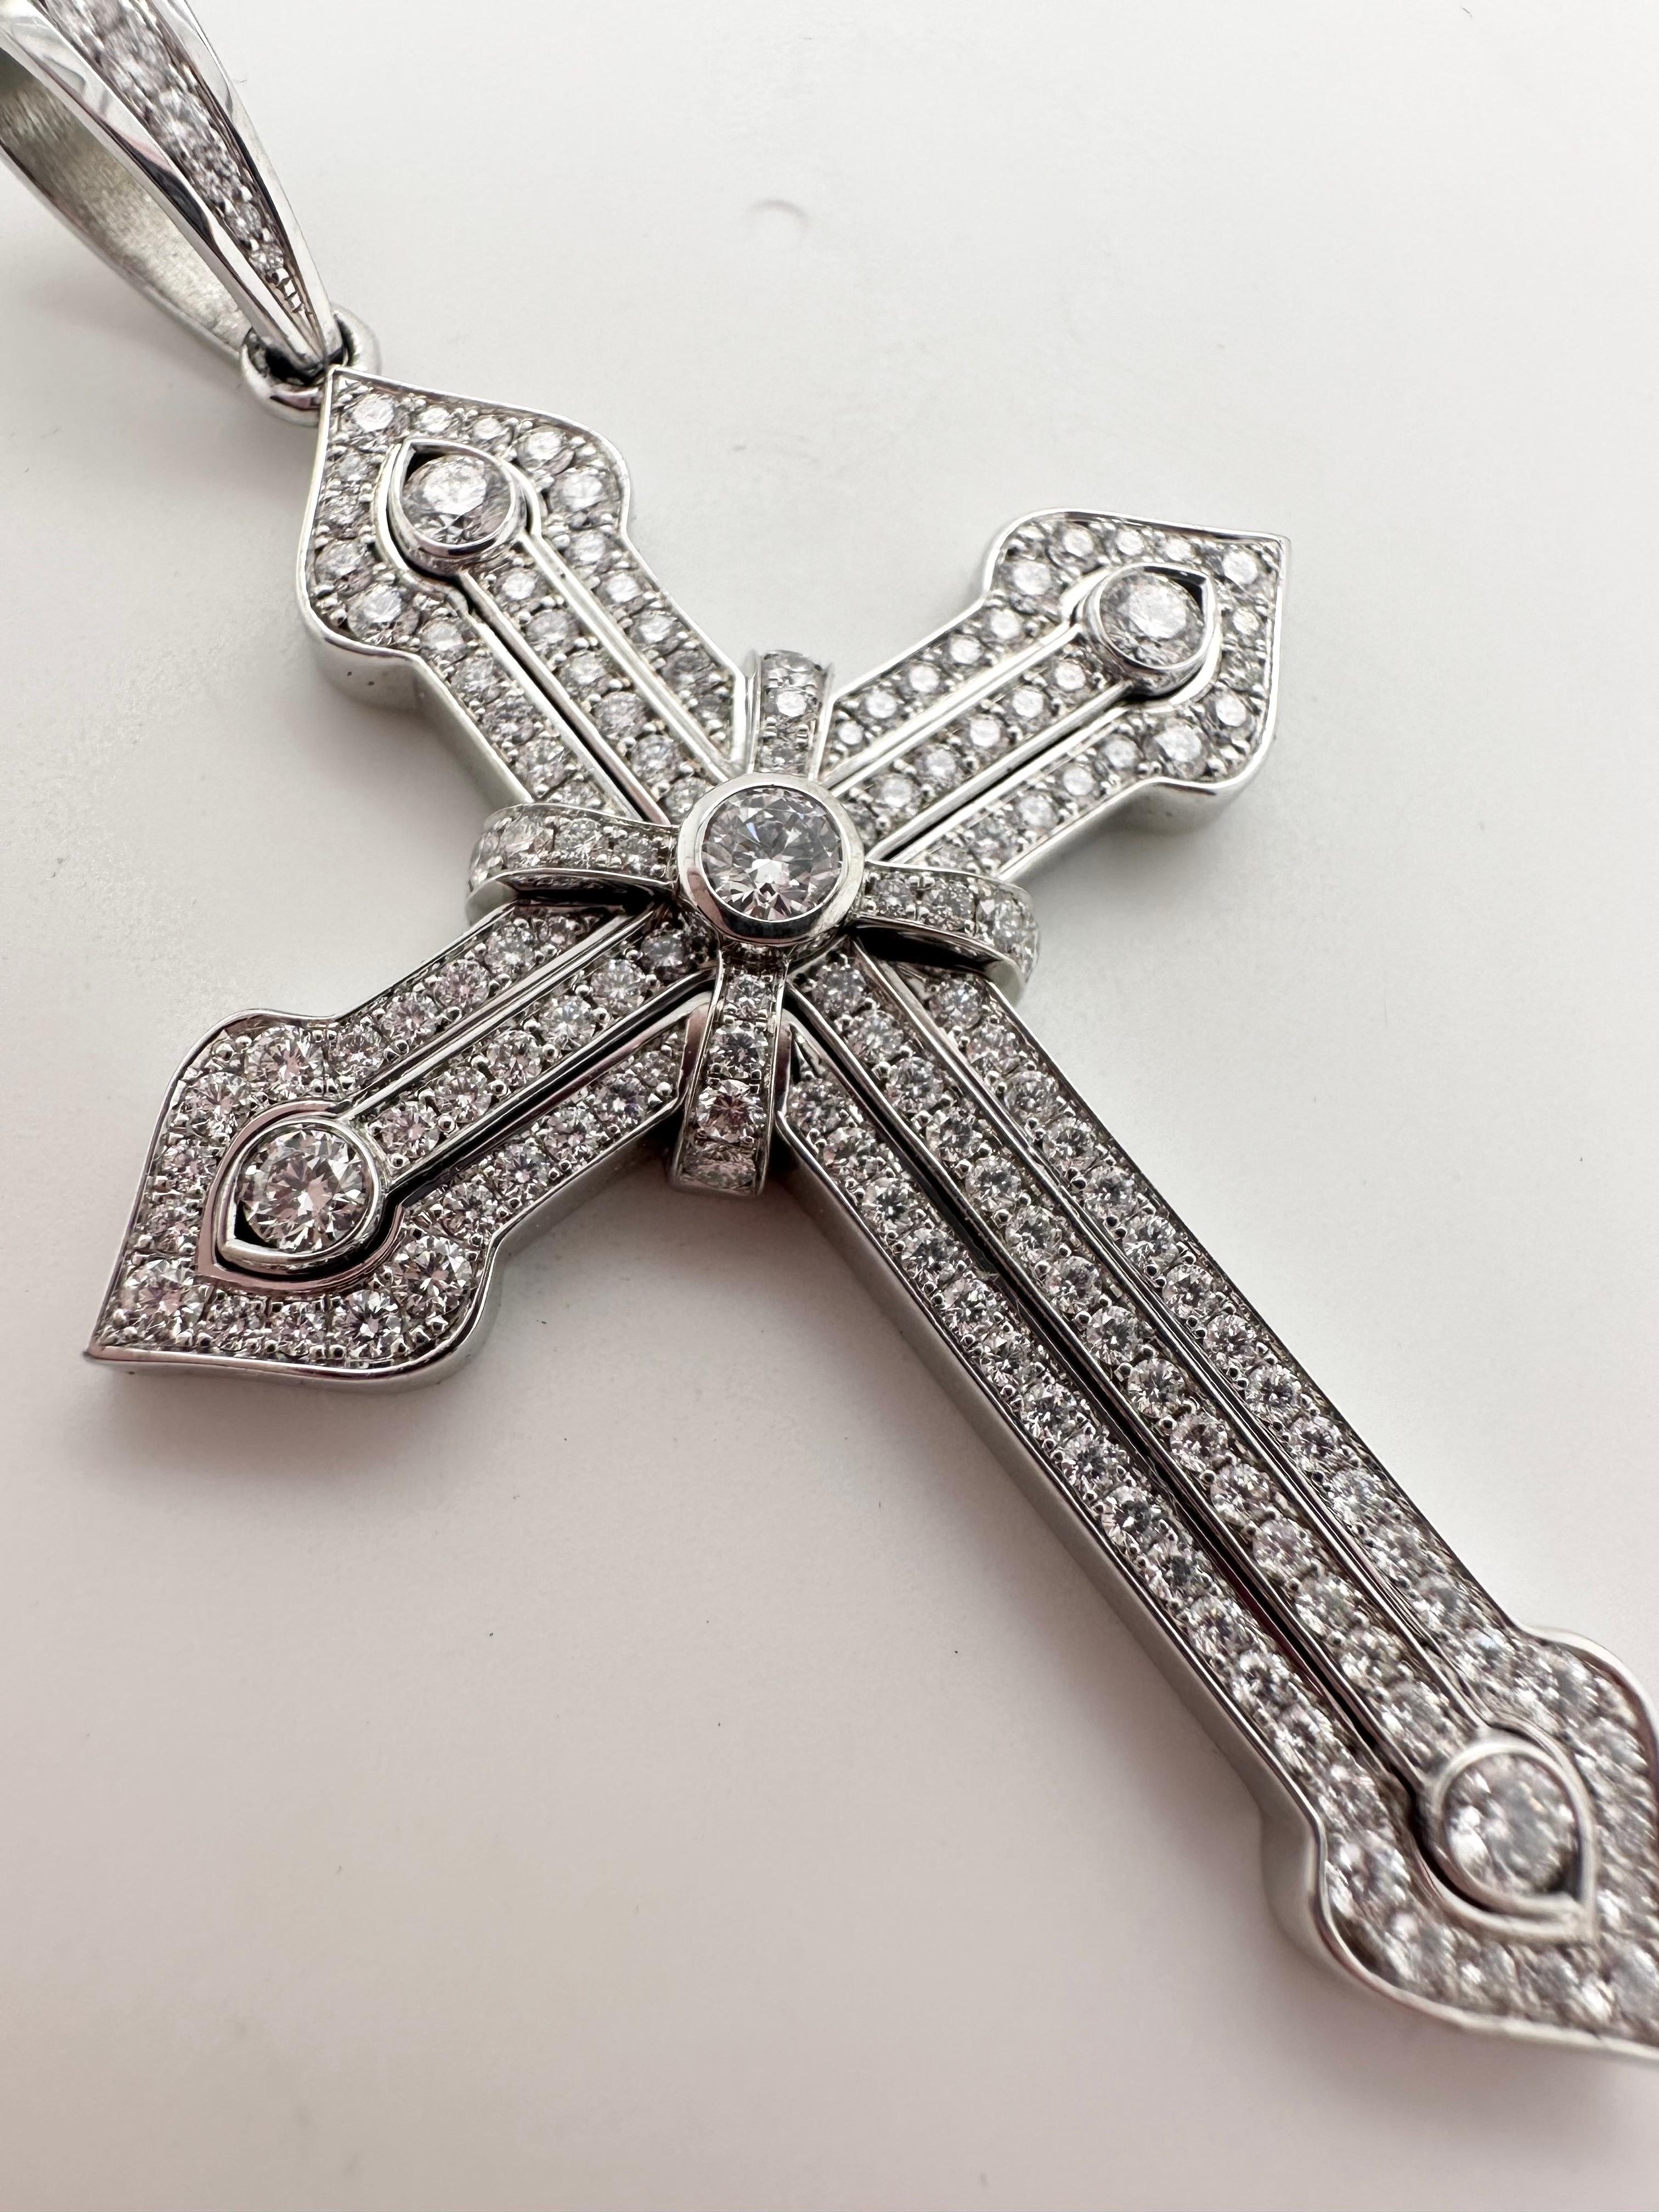 This is a huge mens diamond pendant in 18KT white gold-it will take 1 business day before it ships, this is a heavy custom pendant totaling 14 grams of gold set with 2.25 carats of diamonds VS clarity and F-G colors, this is a unique pendant for men